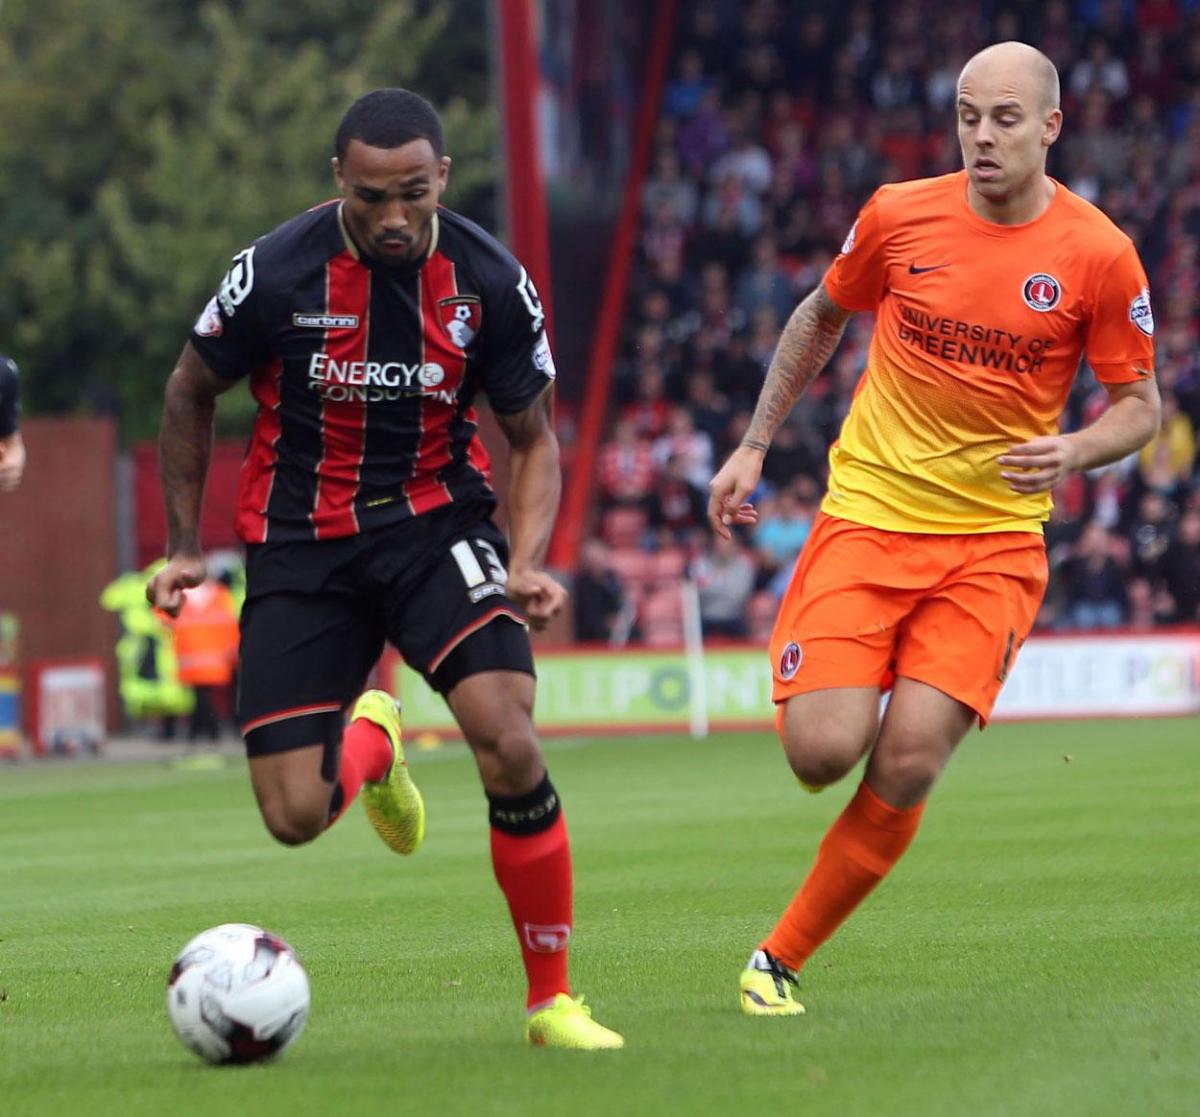 All our pictures of AFC Bournemouth v Charlton Athletic at Dean Court on Saturday, October 18 2014 by Jon Beal. 